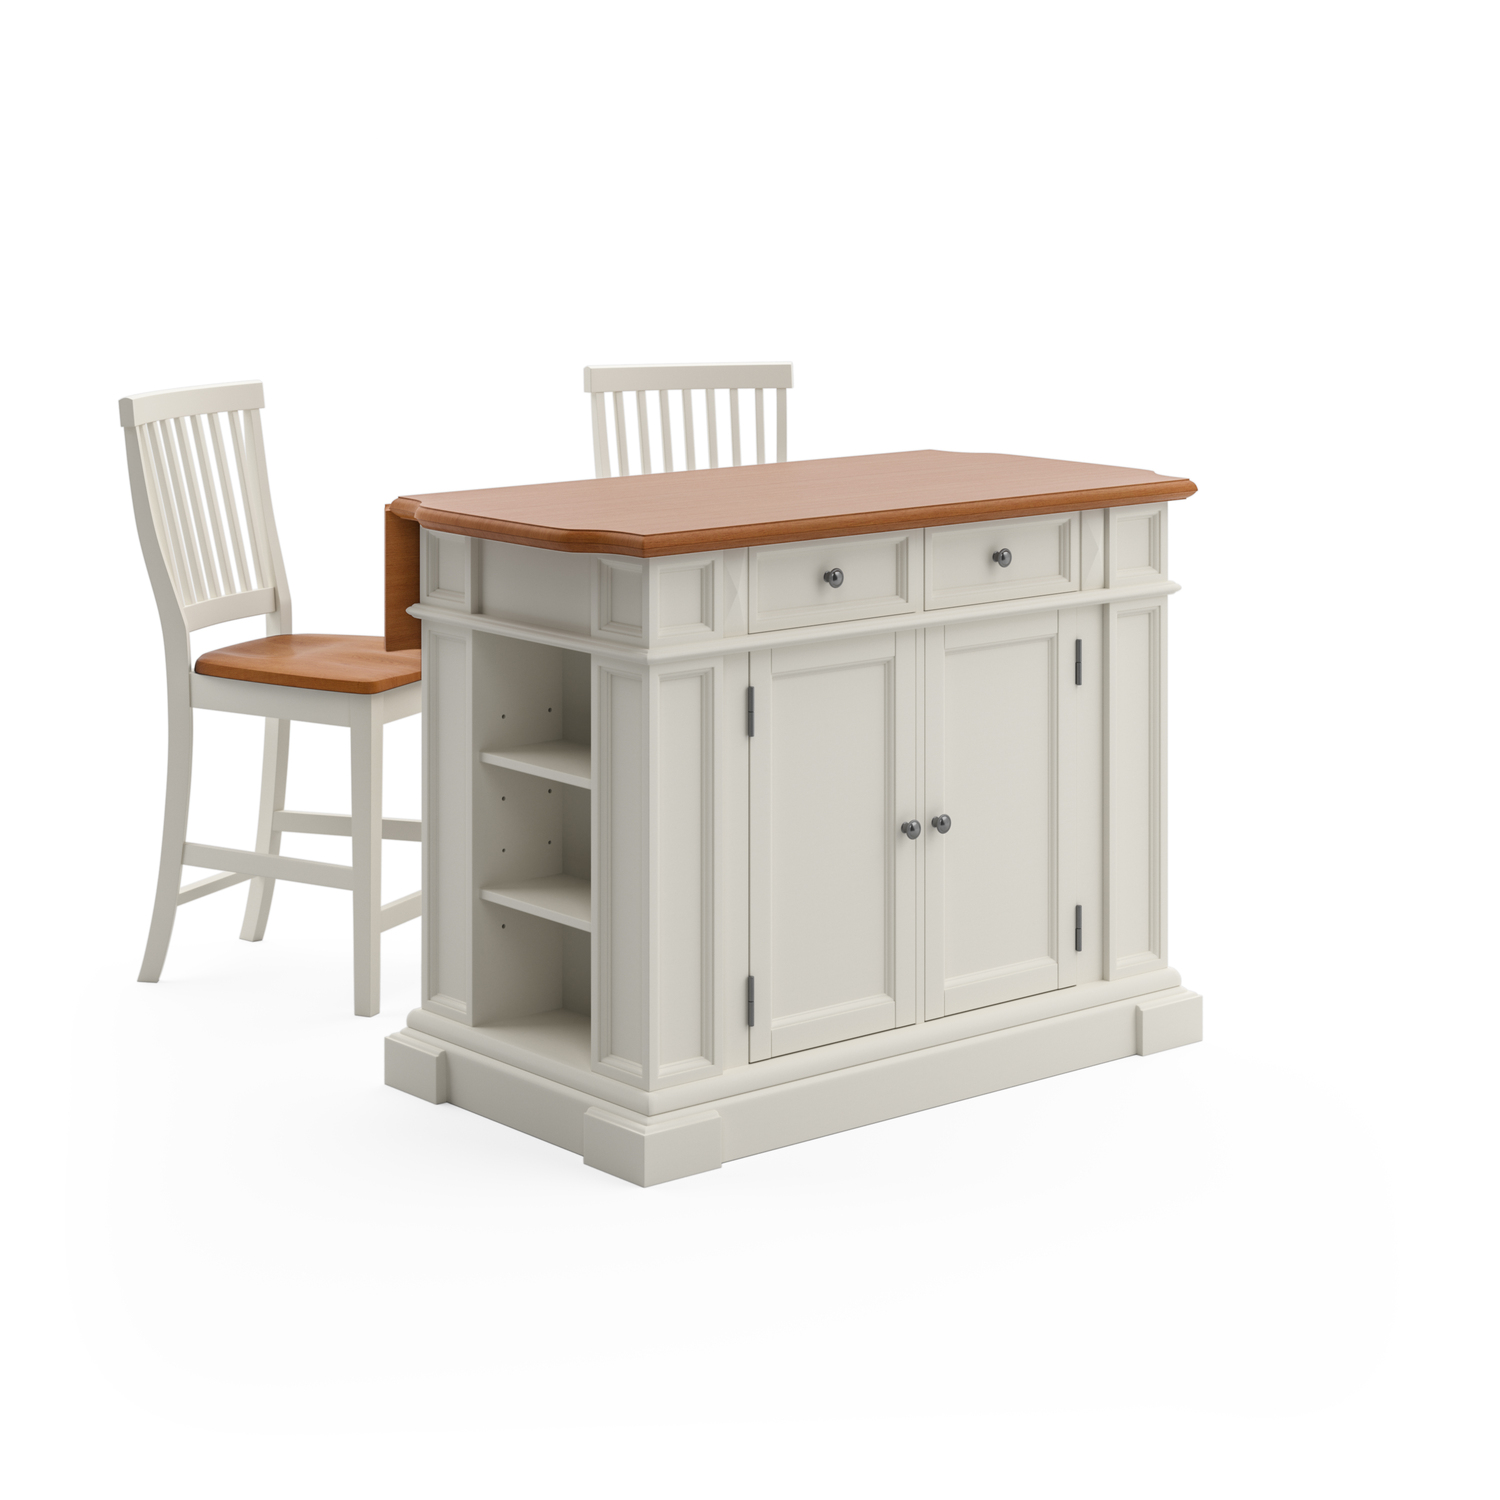 Homestyles Americana Wood Kitchen Island Set in Off White - image 1 of 7